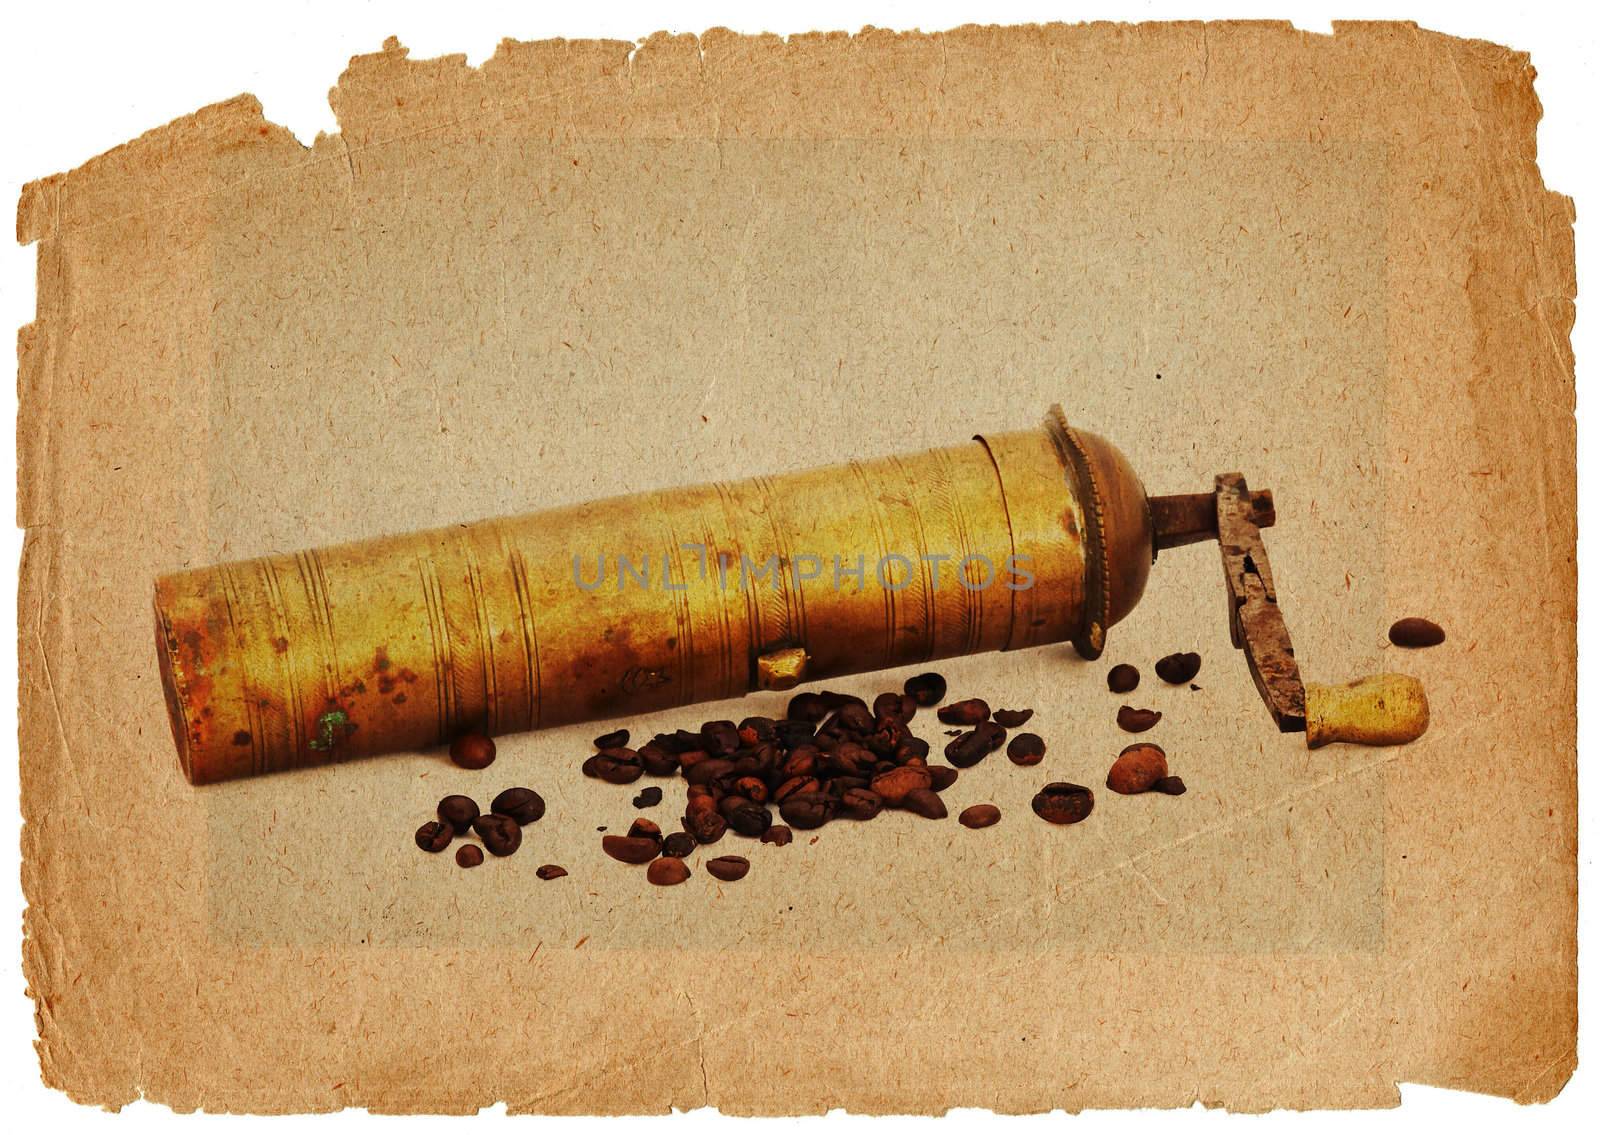 coffee mill and beans in grunge style by Mibuch